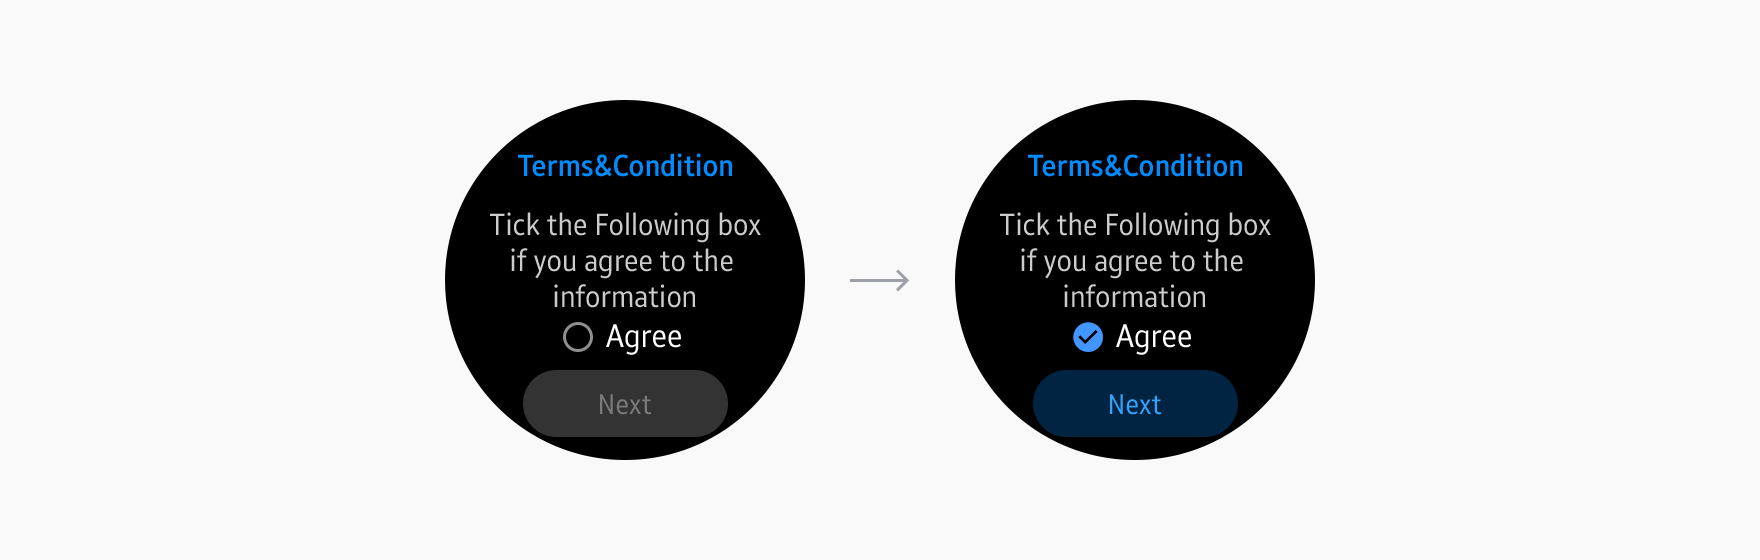 Terms and conditions provide a checkbox below the content so users can agree or disagree.